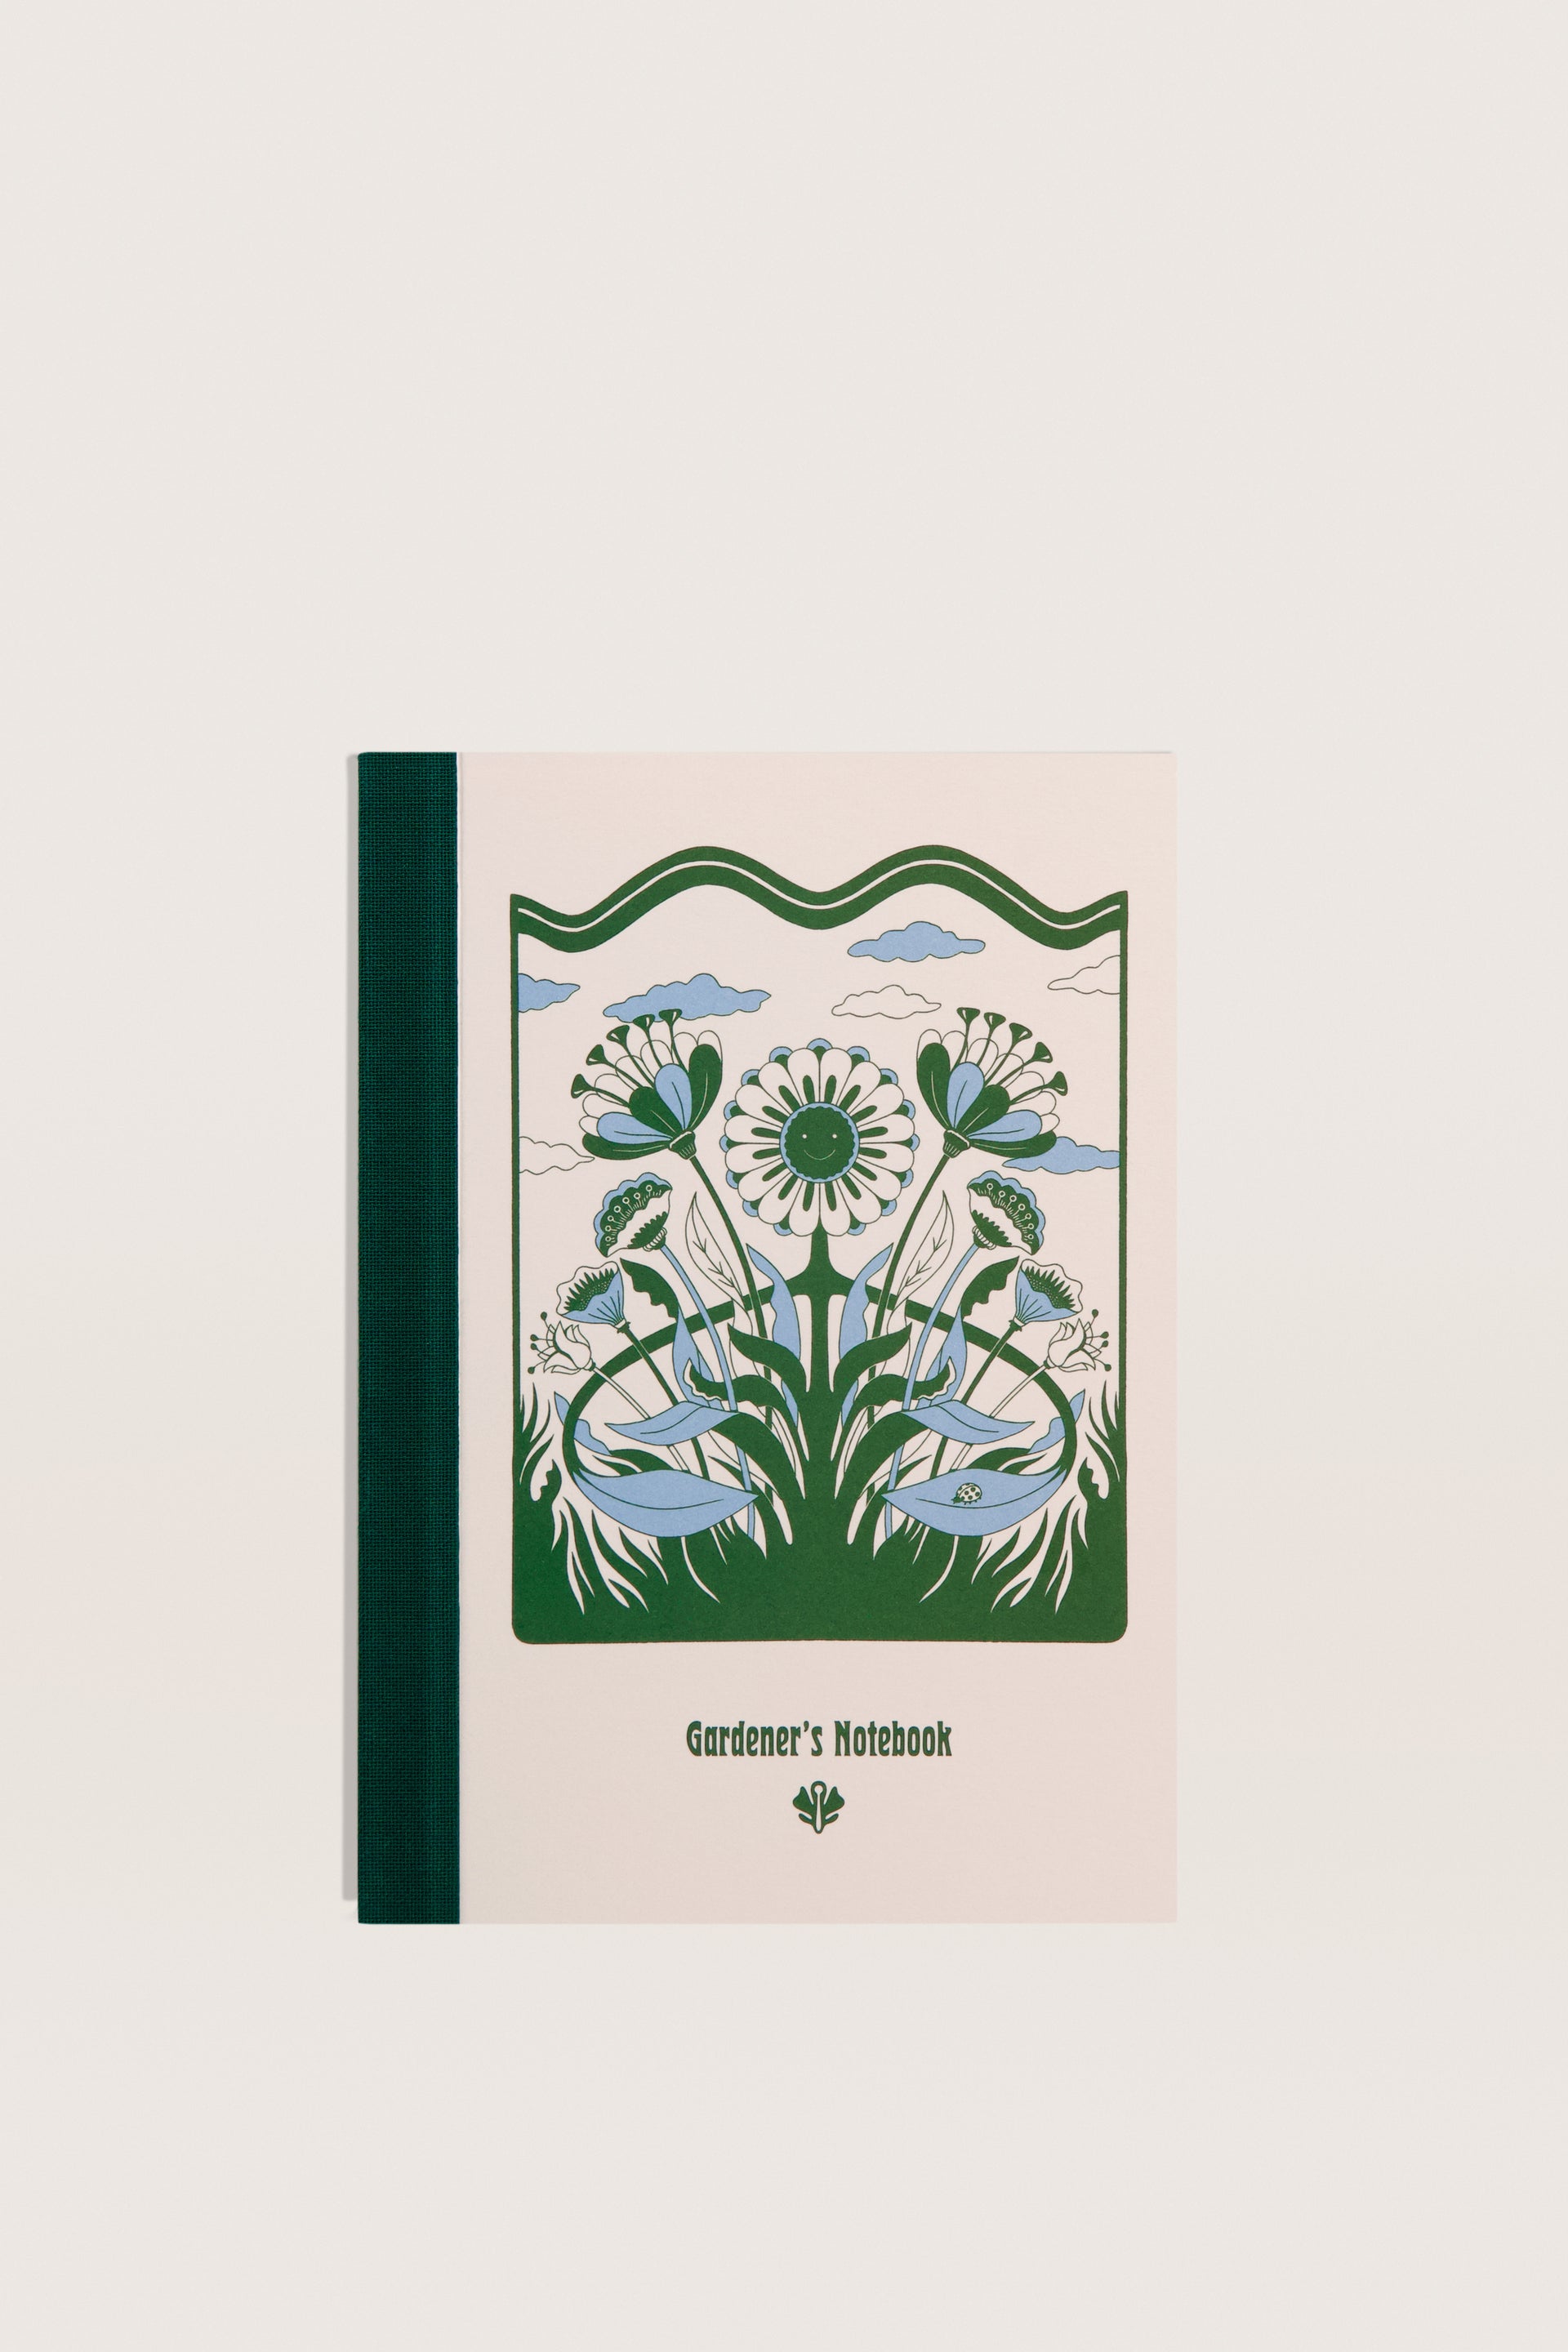 Sowvital A6 size notebook with flowers blooming theme.